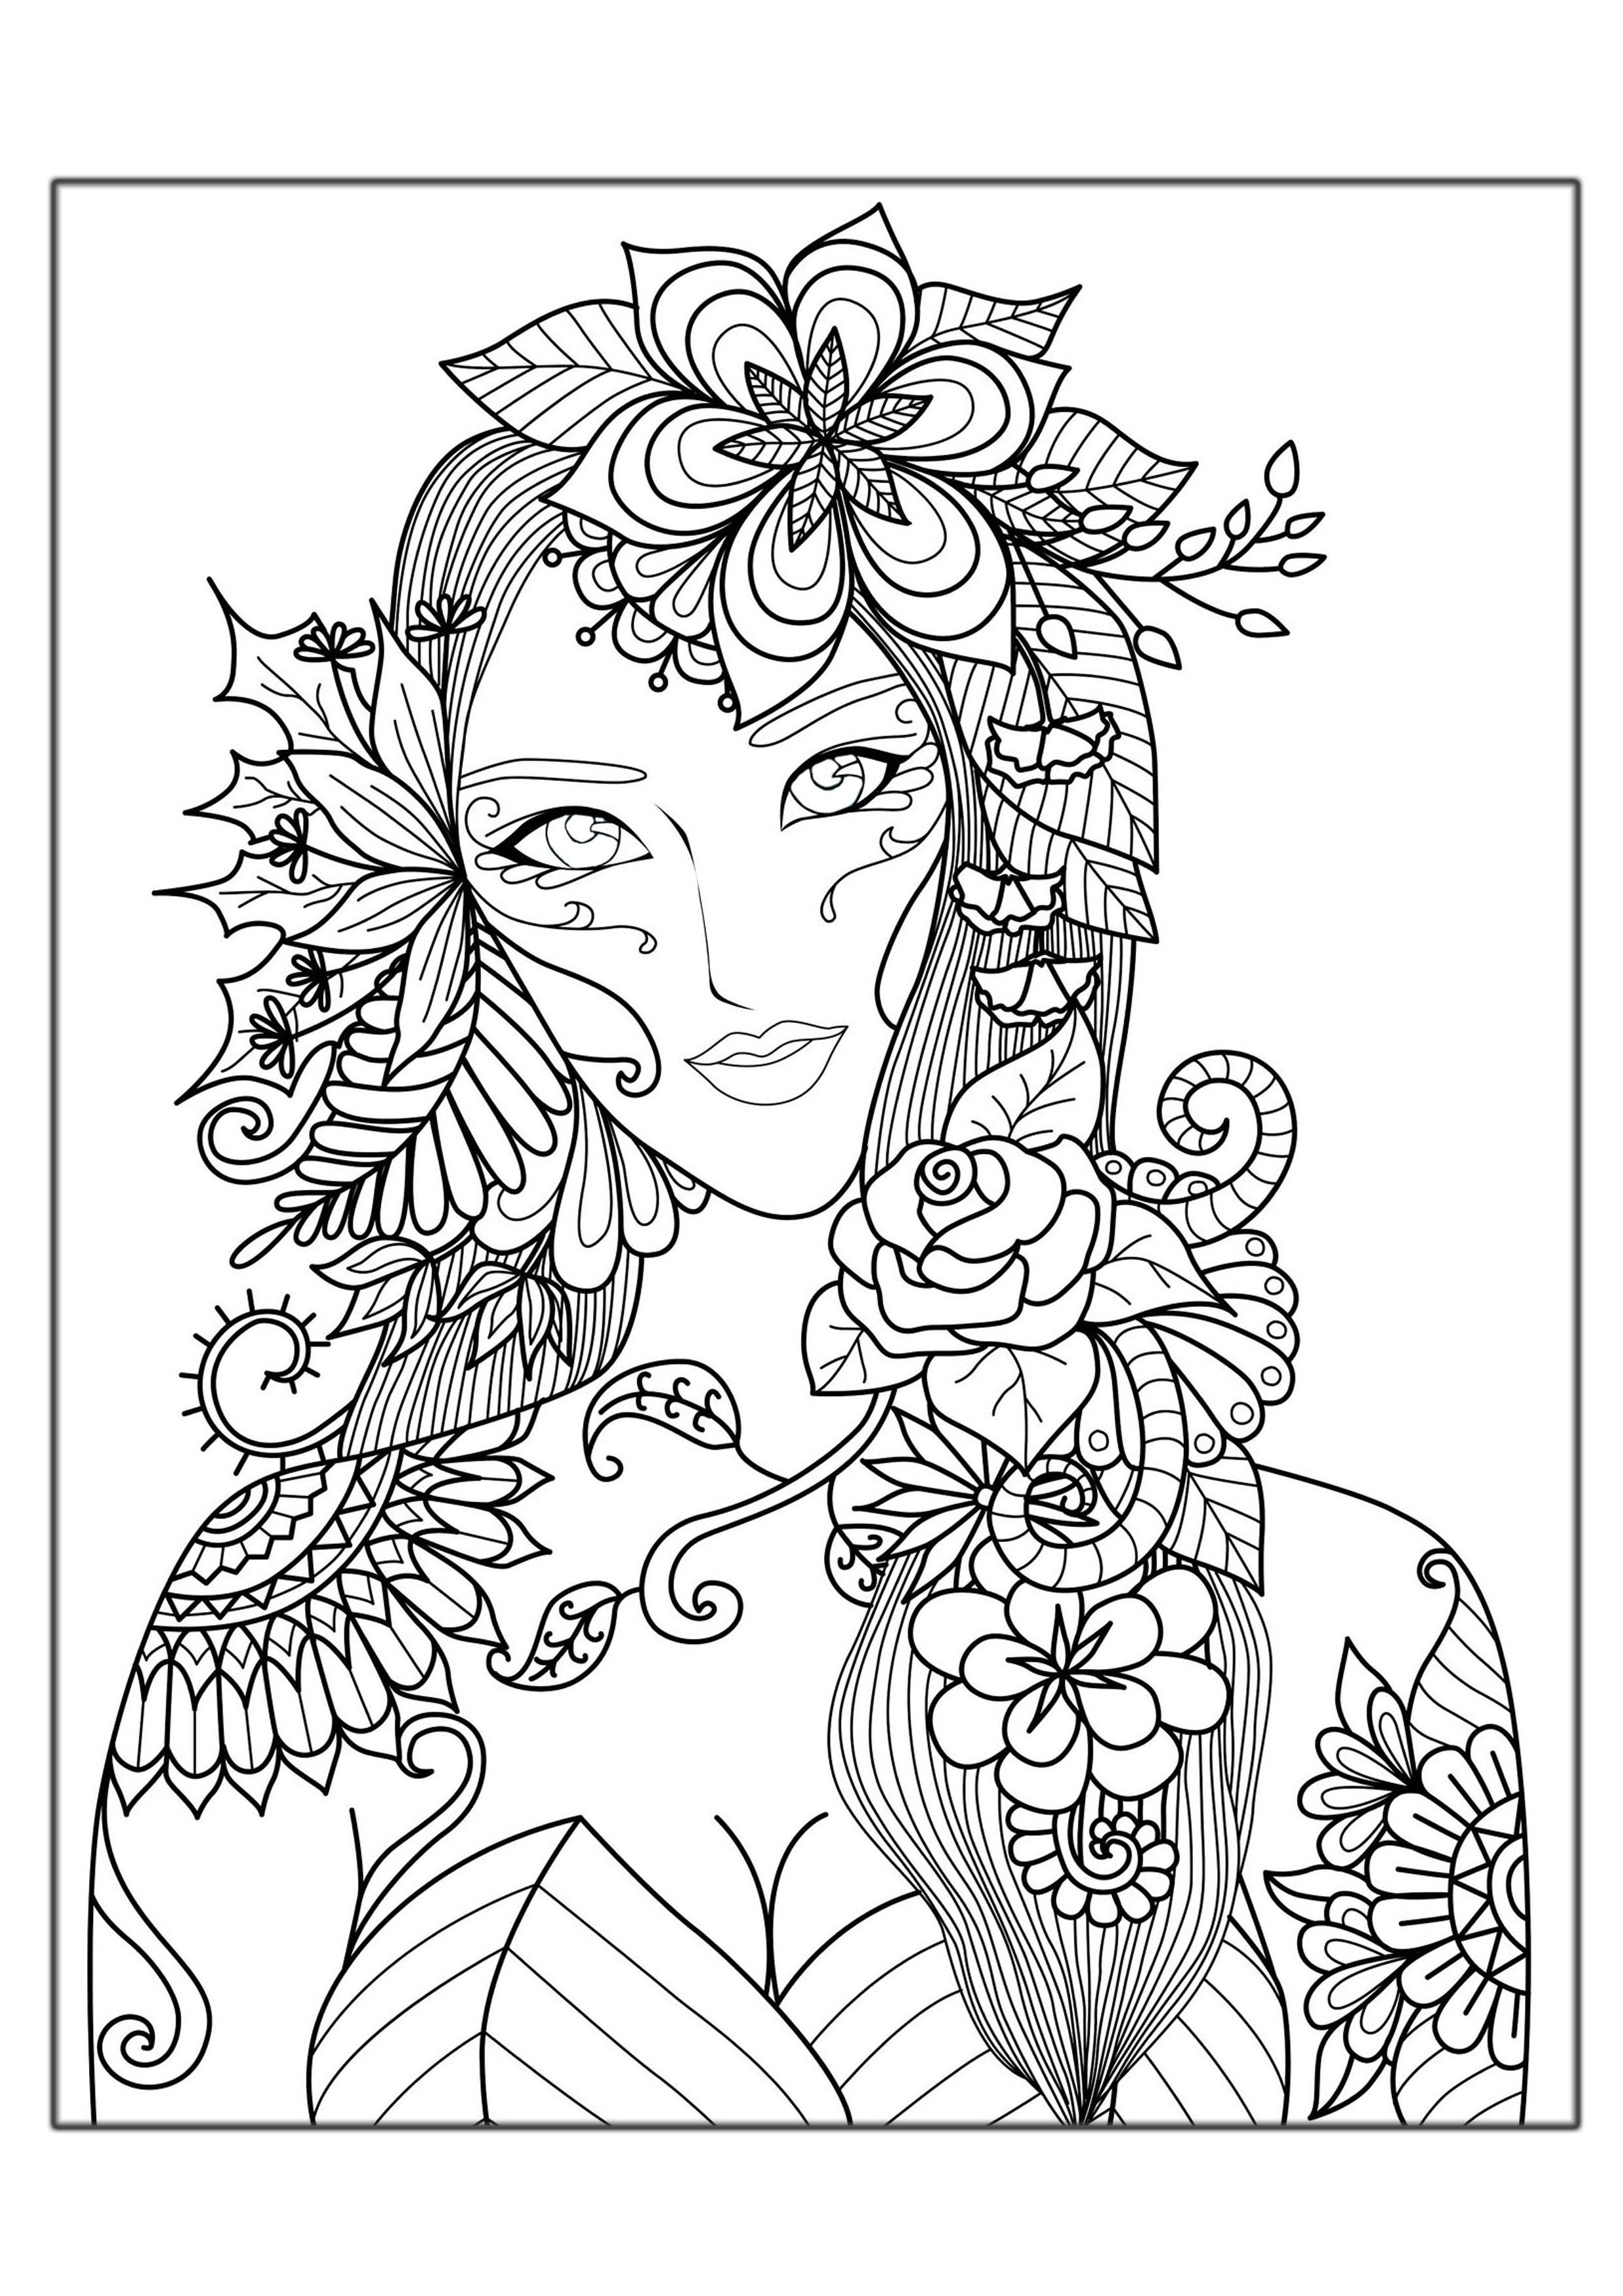 New Coloring Book For Adults
 Hard Coloring Pages for Adults Best Coloring Pages For Kids